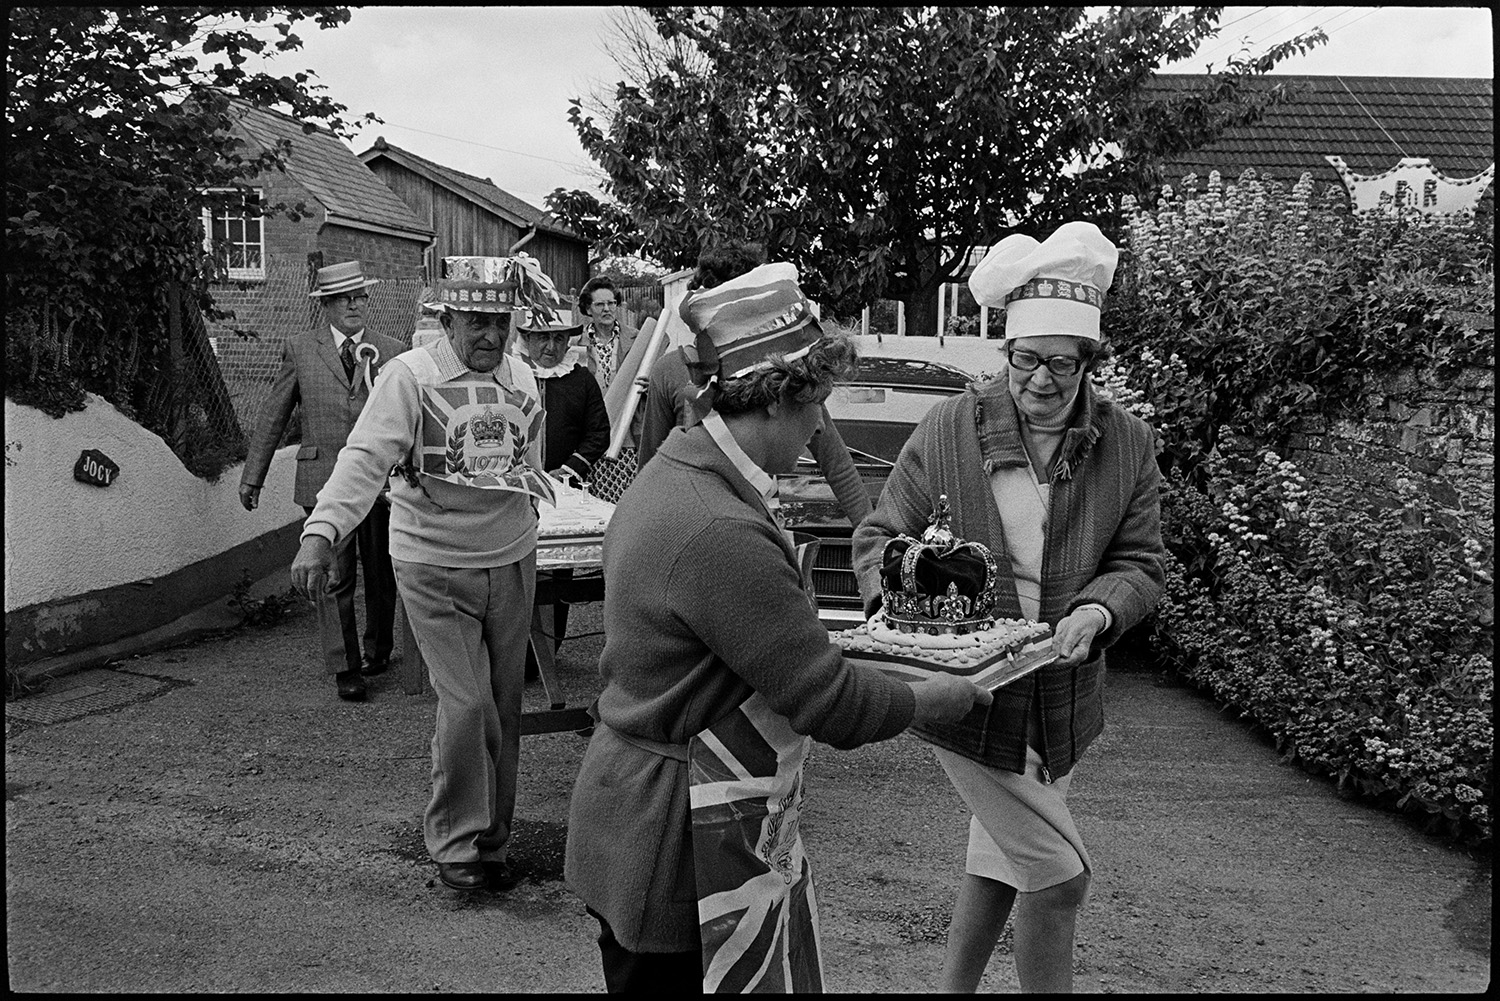 Procession for giant Jubilee cake, village square. Man listening to radio. <br />
[Men and women parading a giant cake through a street in Dolton to celebrate the Silver Jubilee of Queen Elizabeth II. The people are wearing decorated hats and aprons.]